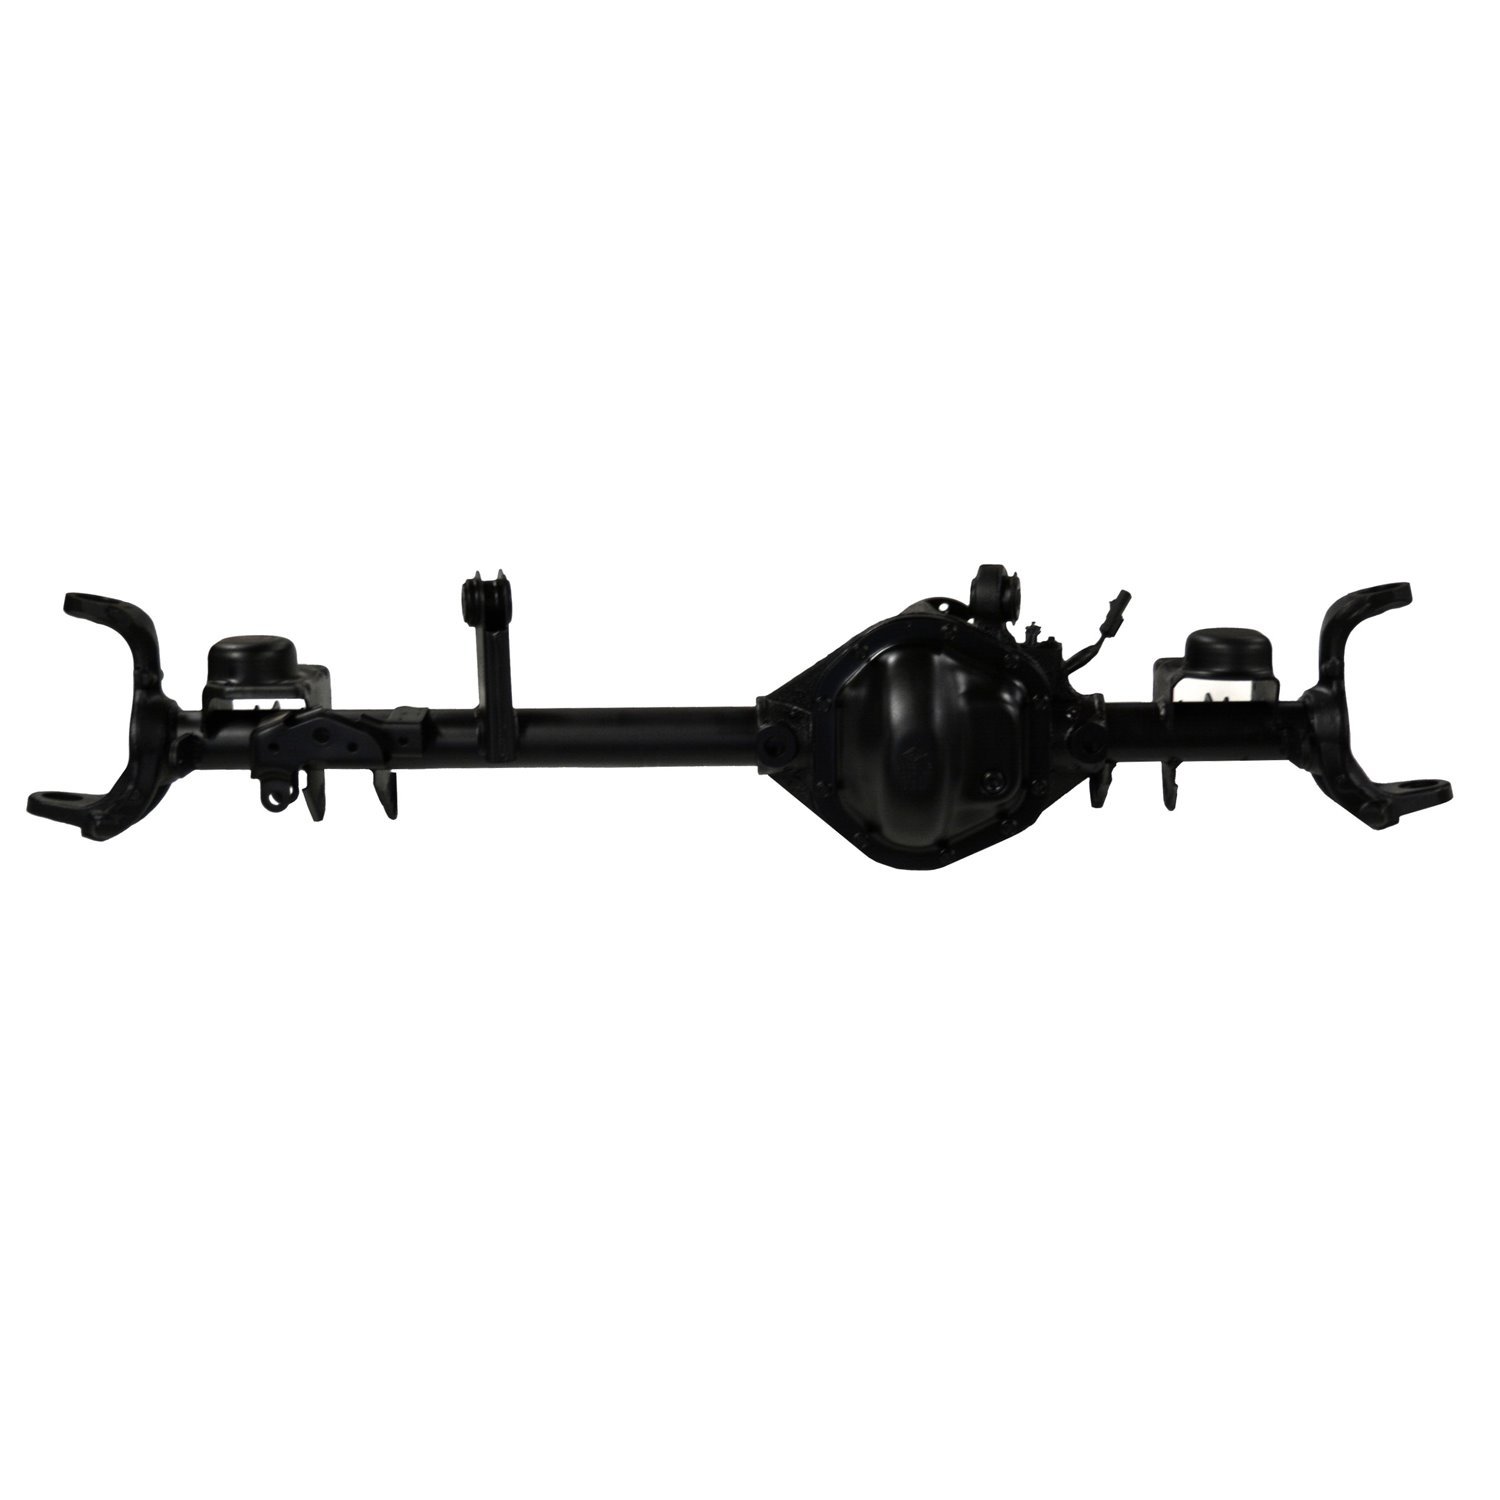 Remanufactured Complete Axle Assembly for Dana 44 2007 Jeep Wrangler 3.21 Ratio